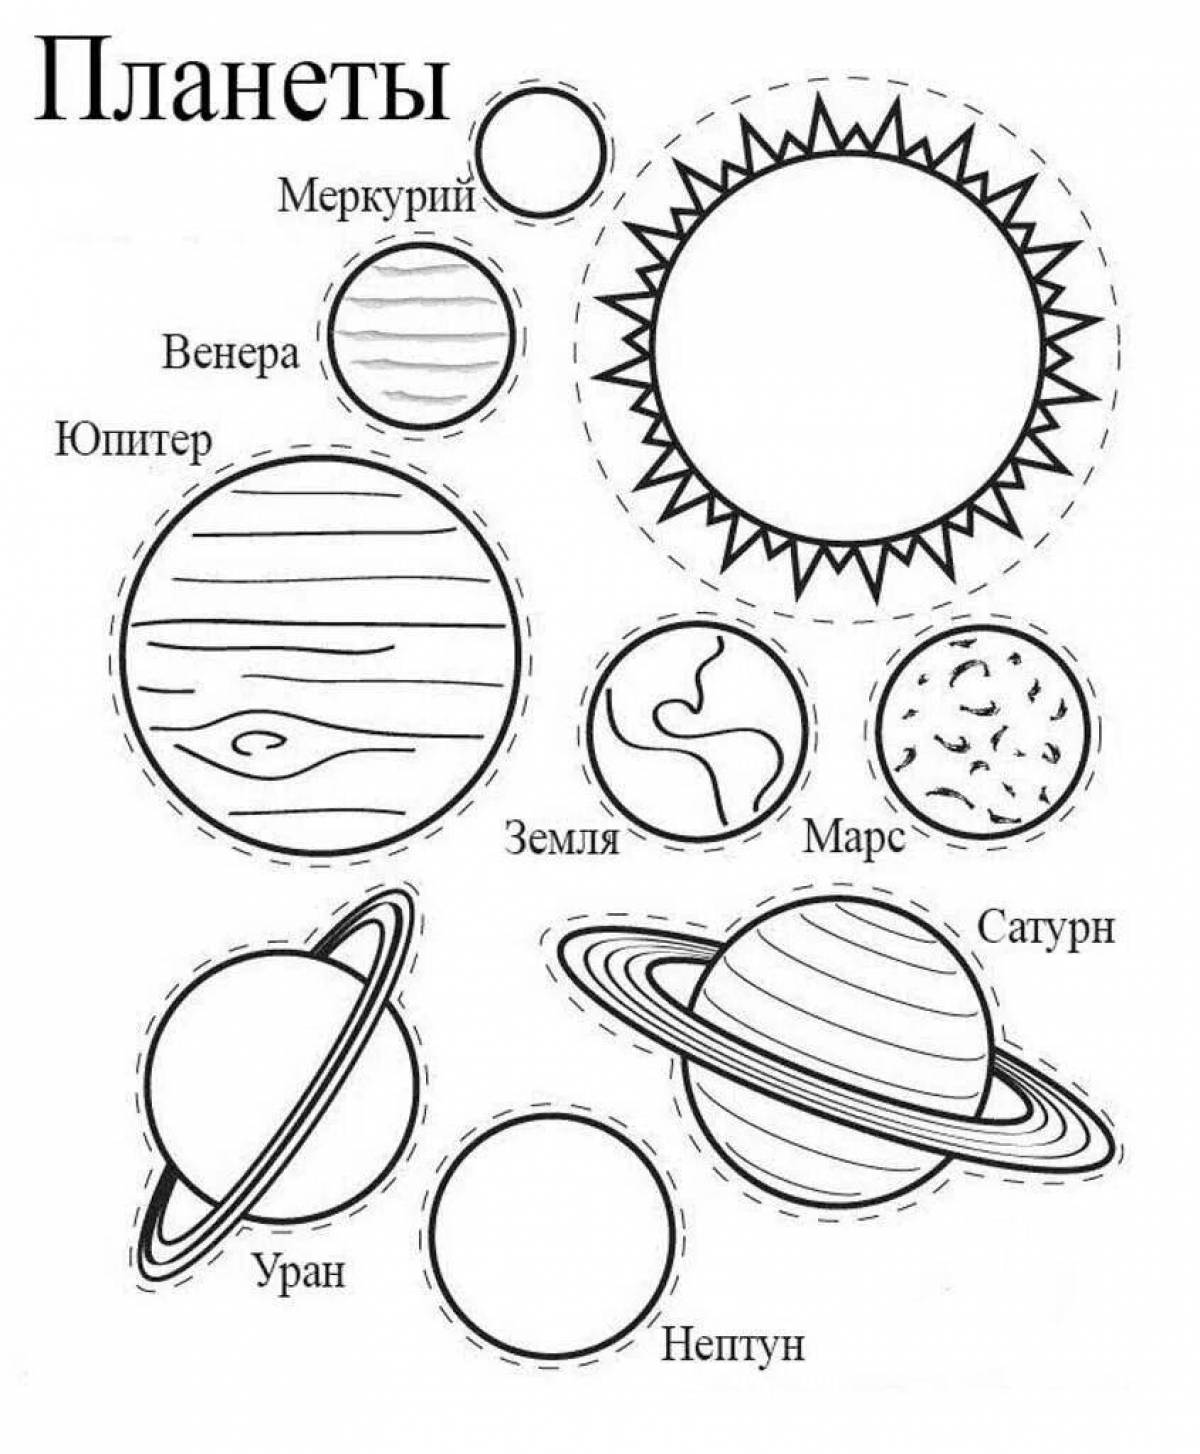 Luminous coloring pages of planets in the solar system in order from the sun